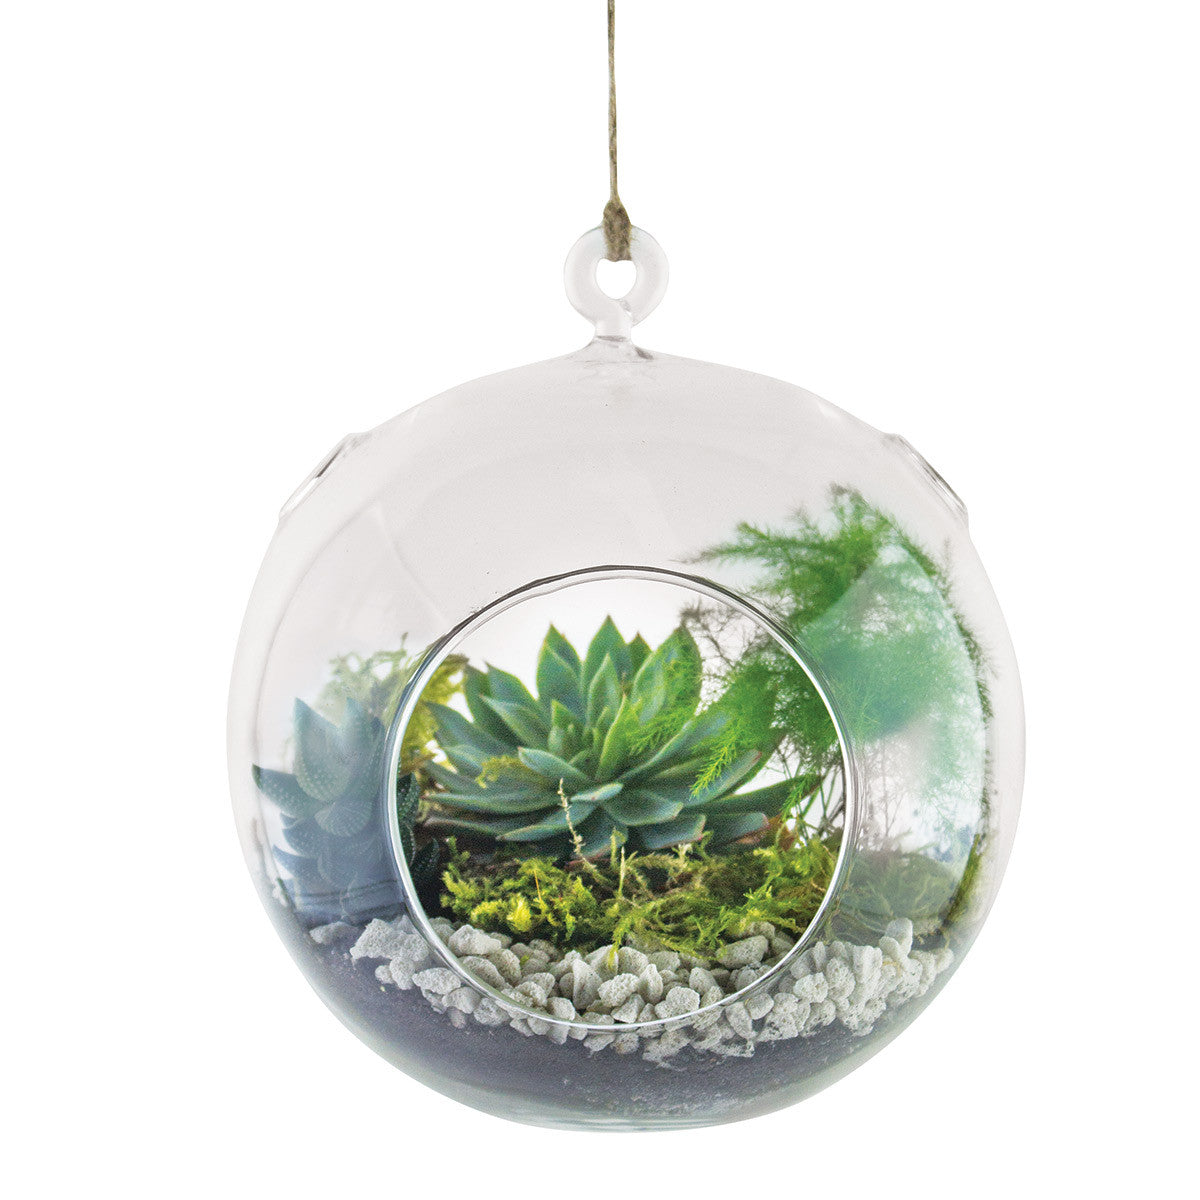 large round hanging terrarium filled with succulents stones and moss on a white background